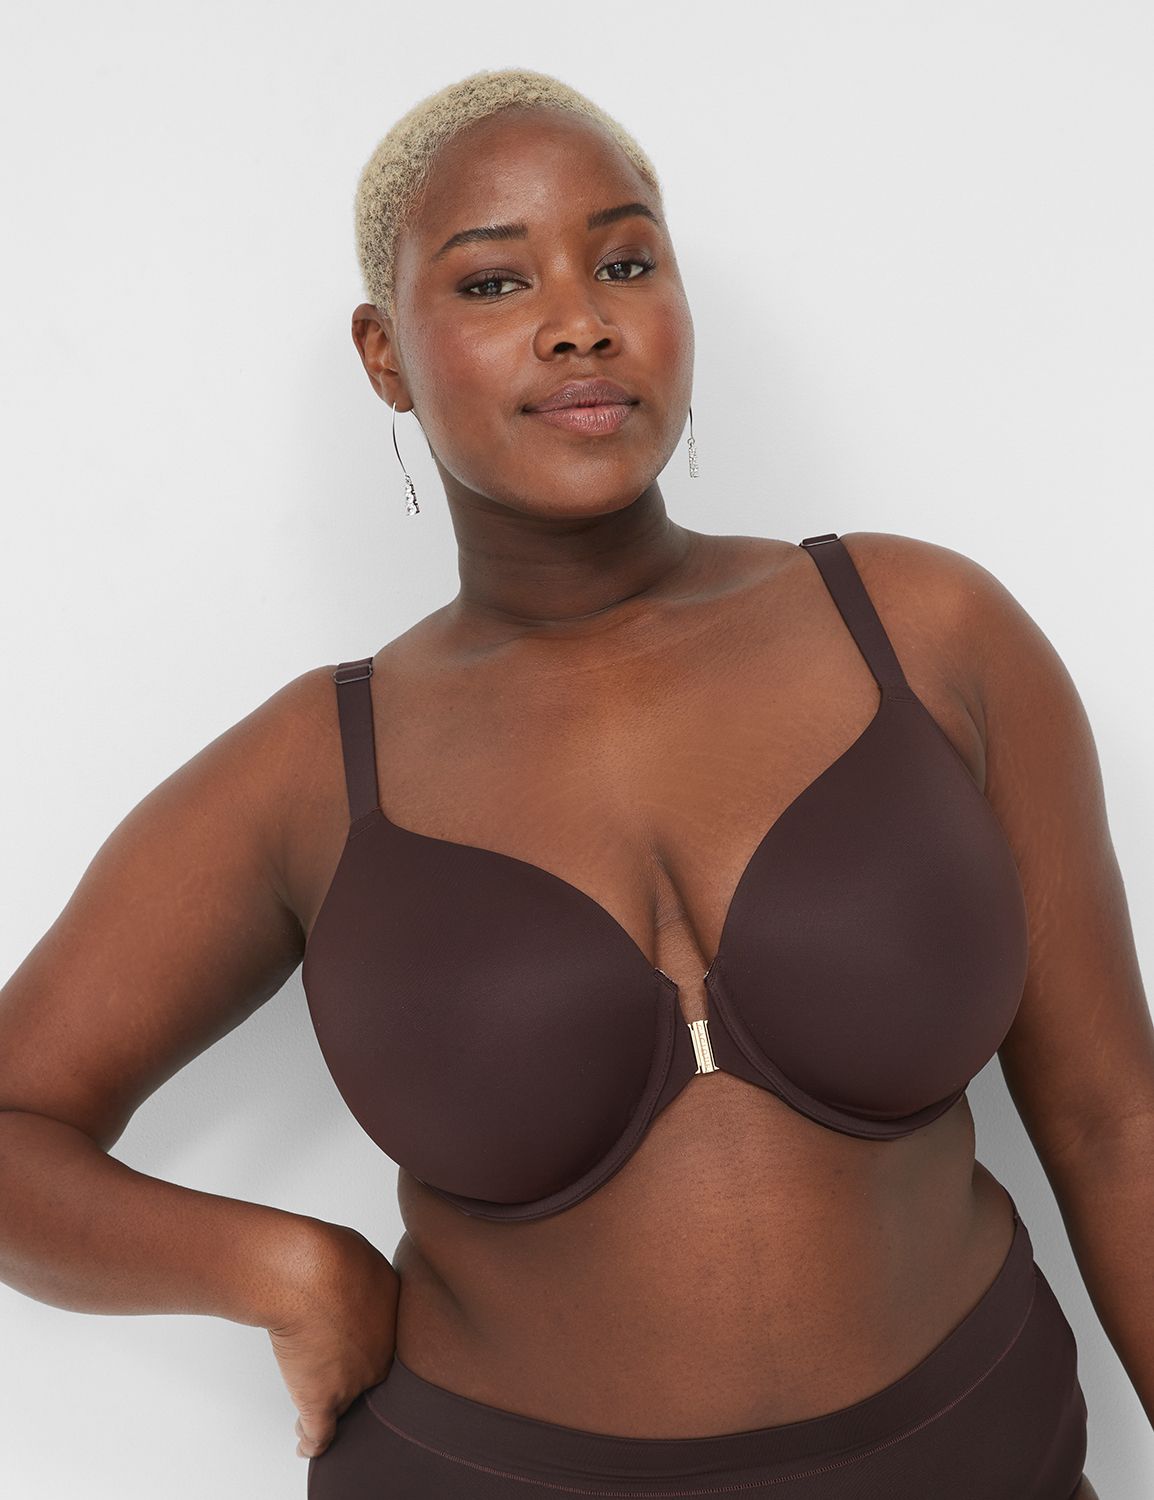 Lane Bryant - You know what holds us up? Reviews like this one on our NEW!  Cotton Front-Close bra. Don't forgetyou get $15 off any bra during our  Perfect Bra Fit Event!